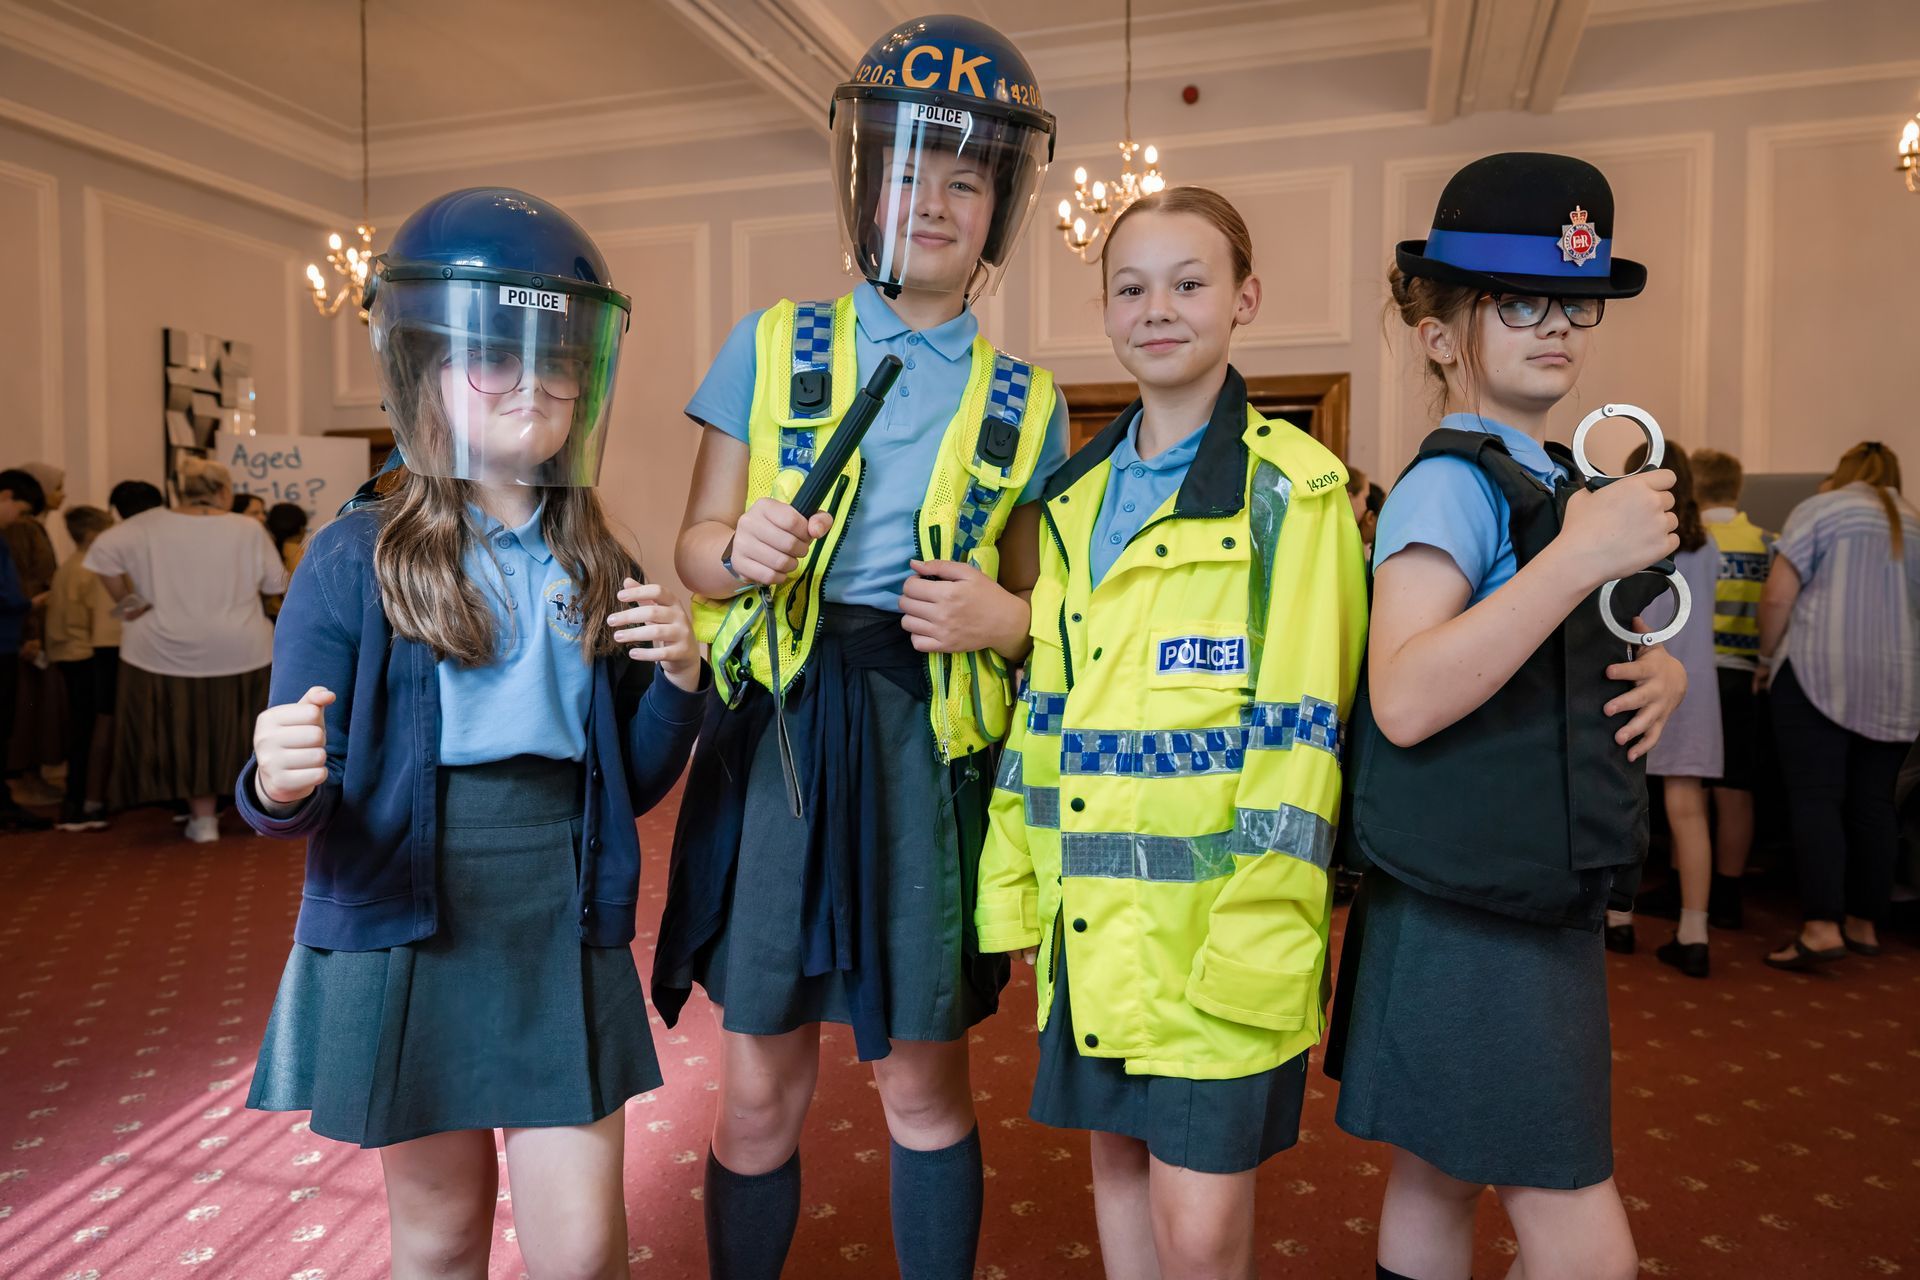 British Transport Police with students